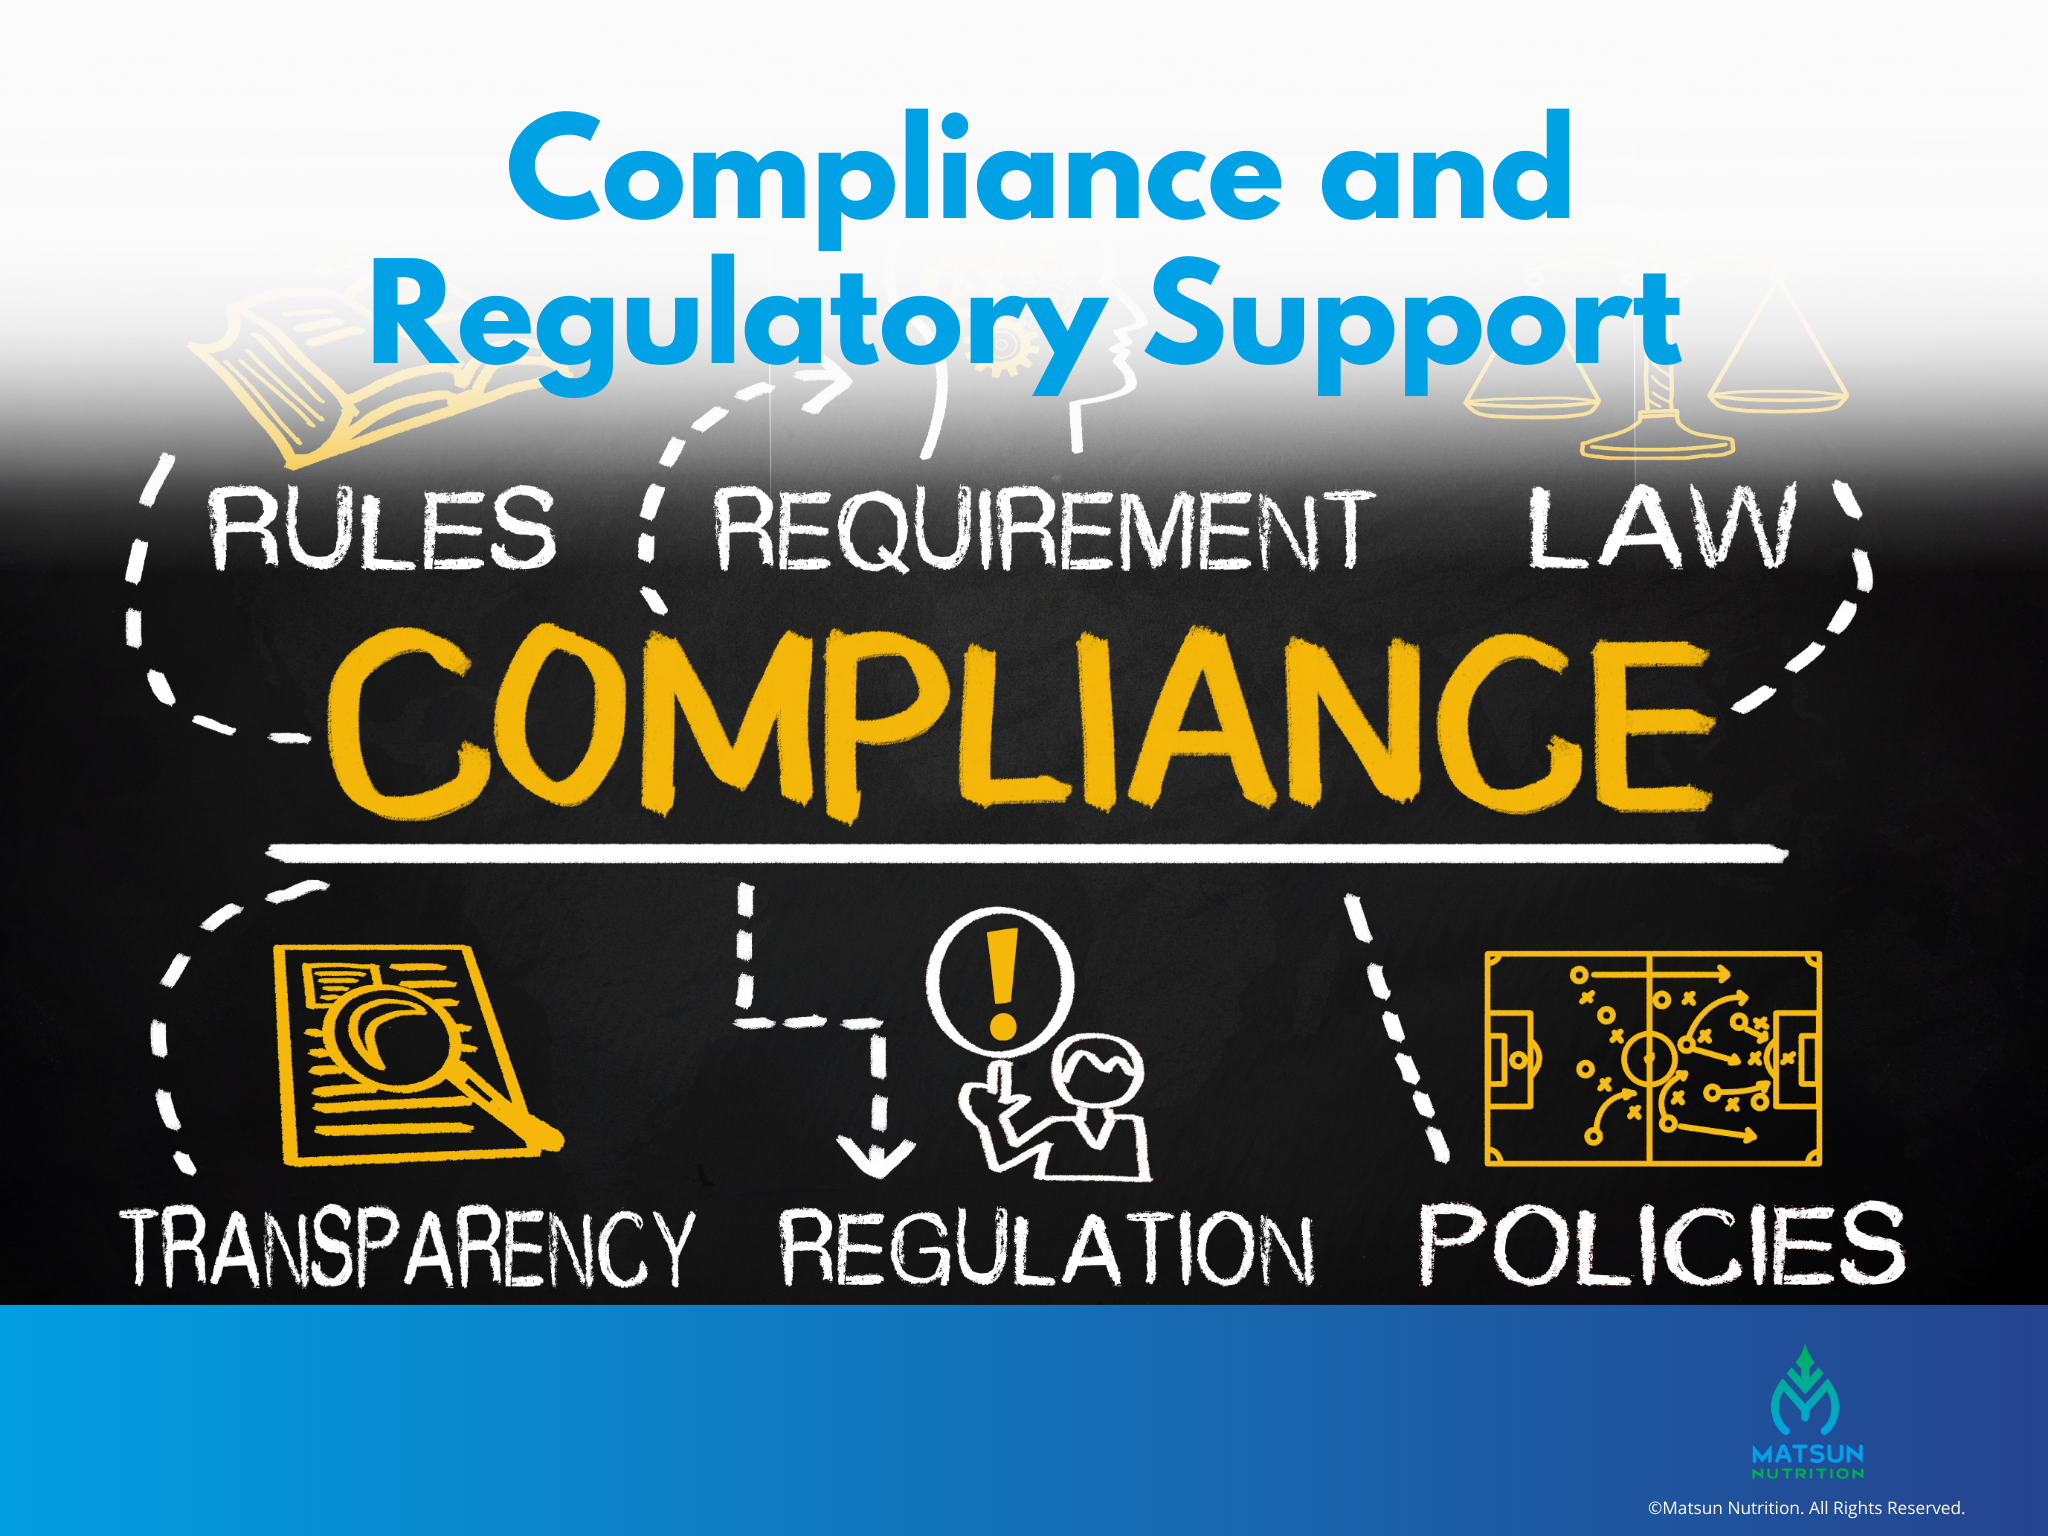 Compliance and Regulatory Support